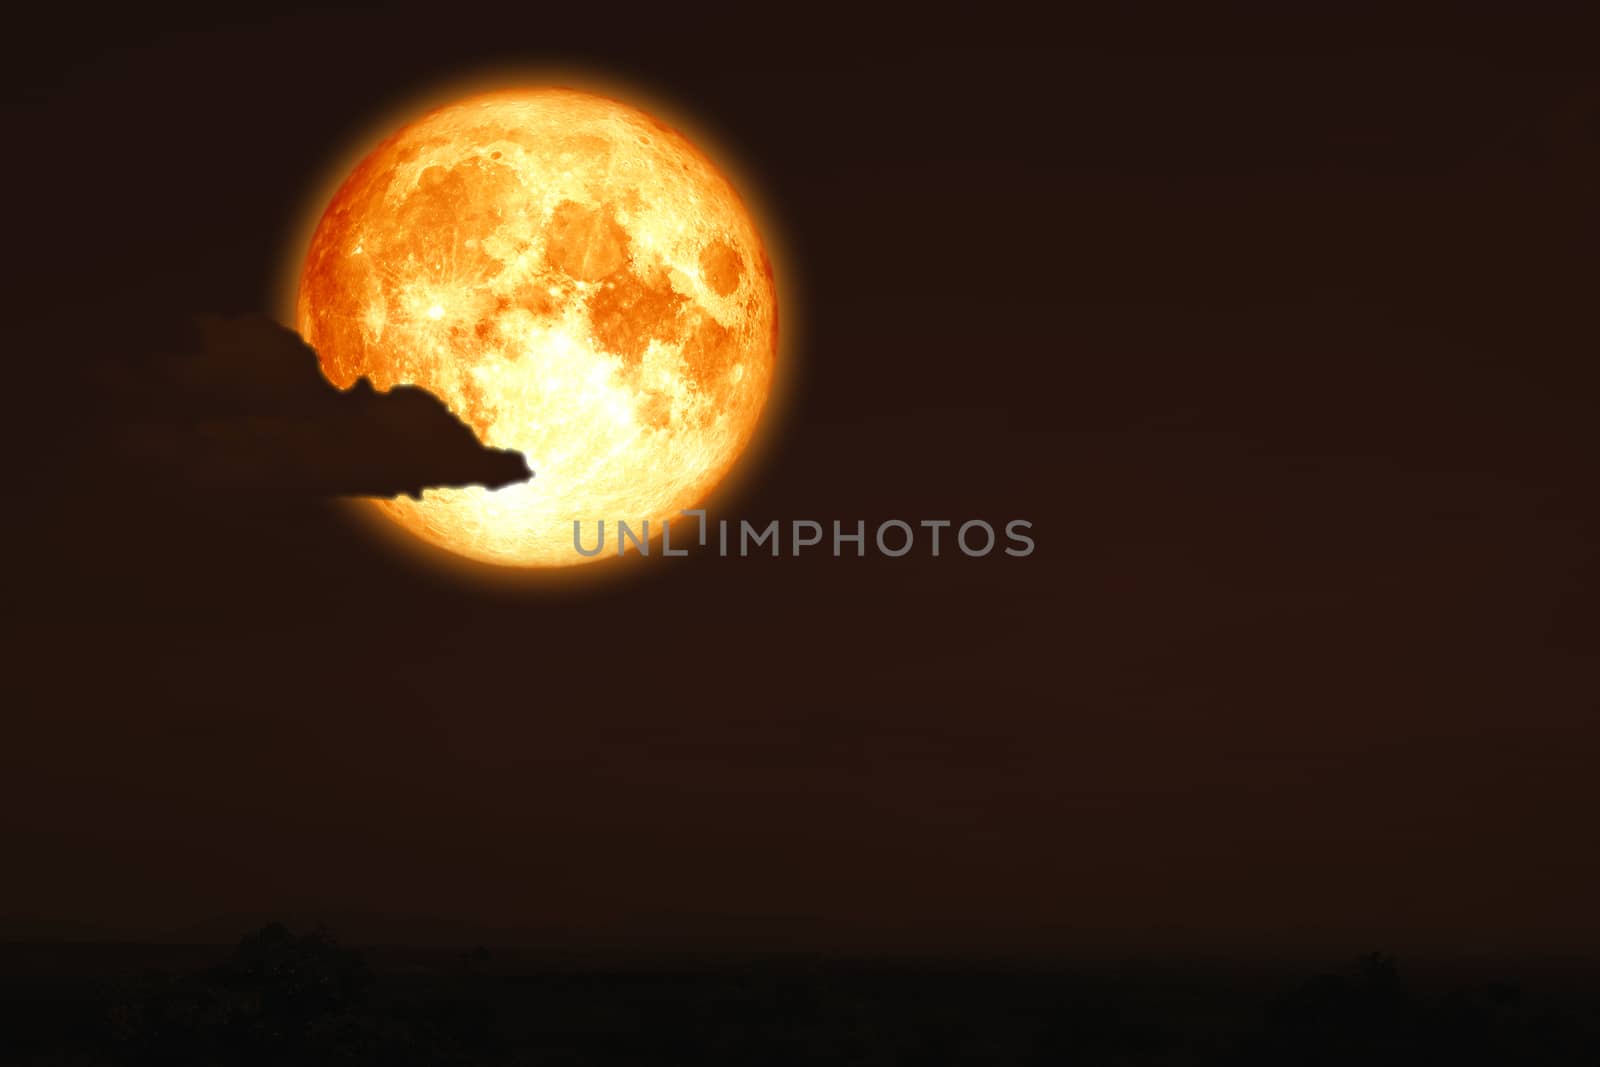 full egg moon back on silhouette mountain on night sky, Elements of this image furnished by NASA